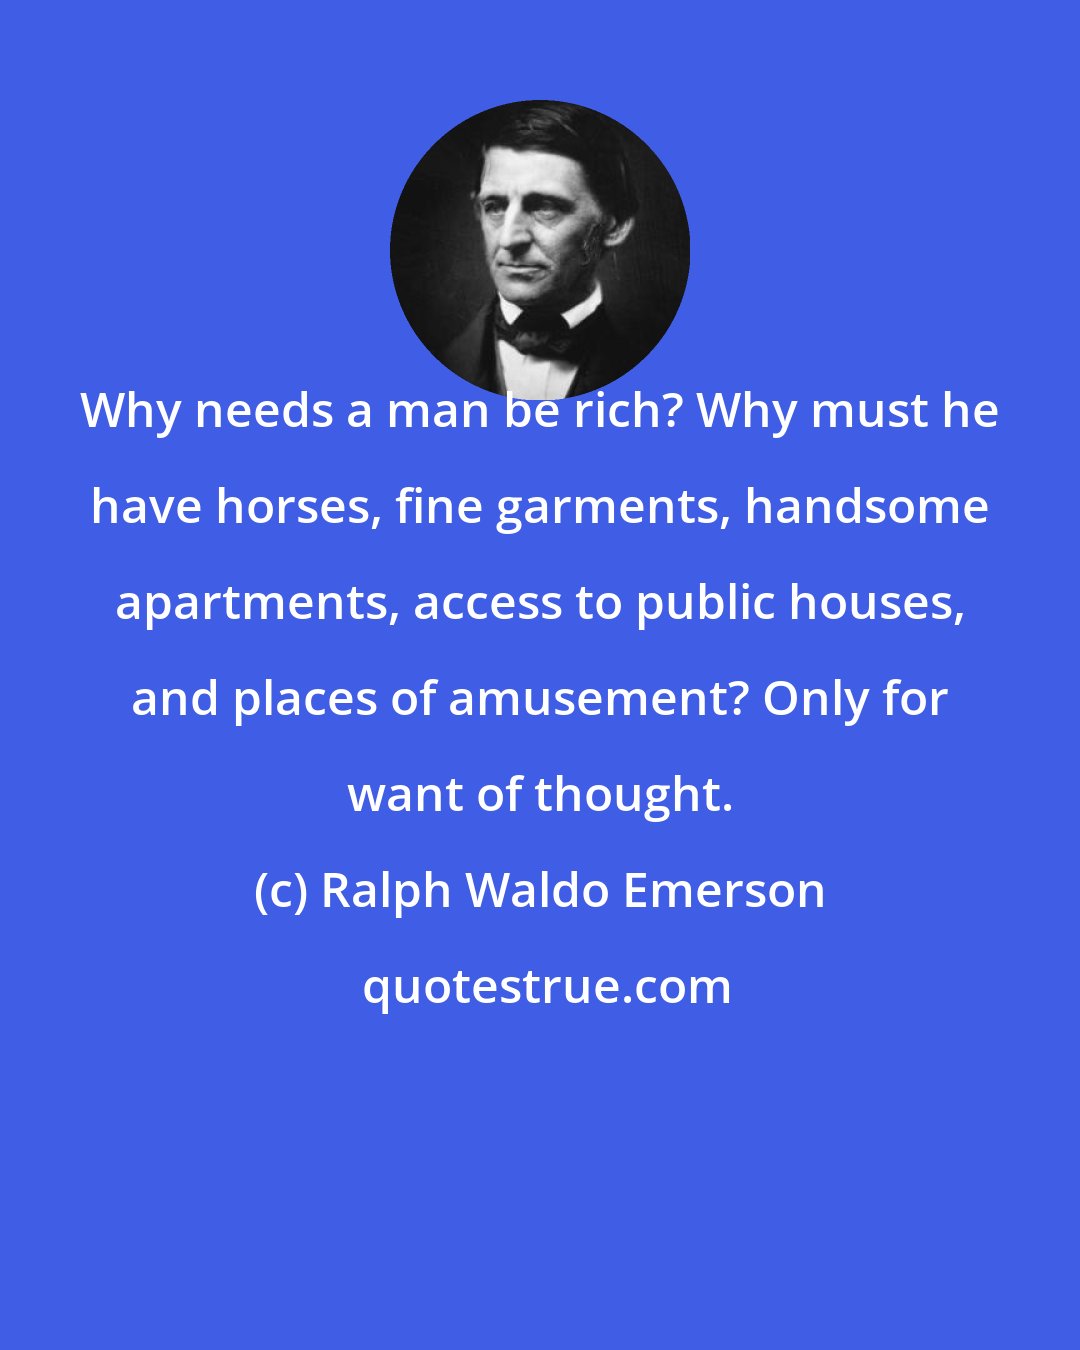 Ralph Waldo Emerson: Why needs a man be rich? Why must he have horses, fine garments, handsome apartments, access to public houses, and places of amusement? Only for want of thought.